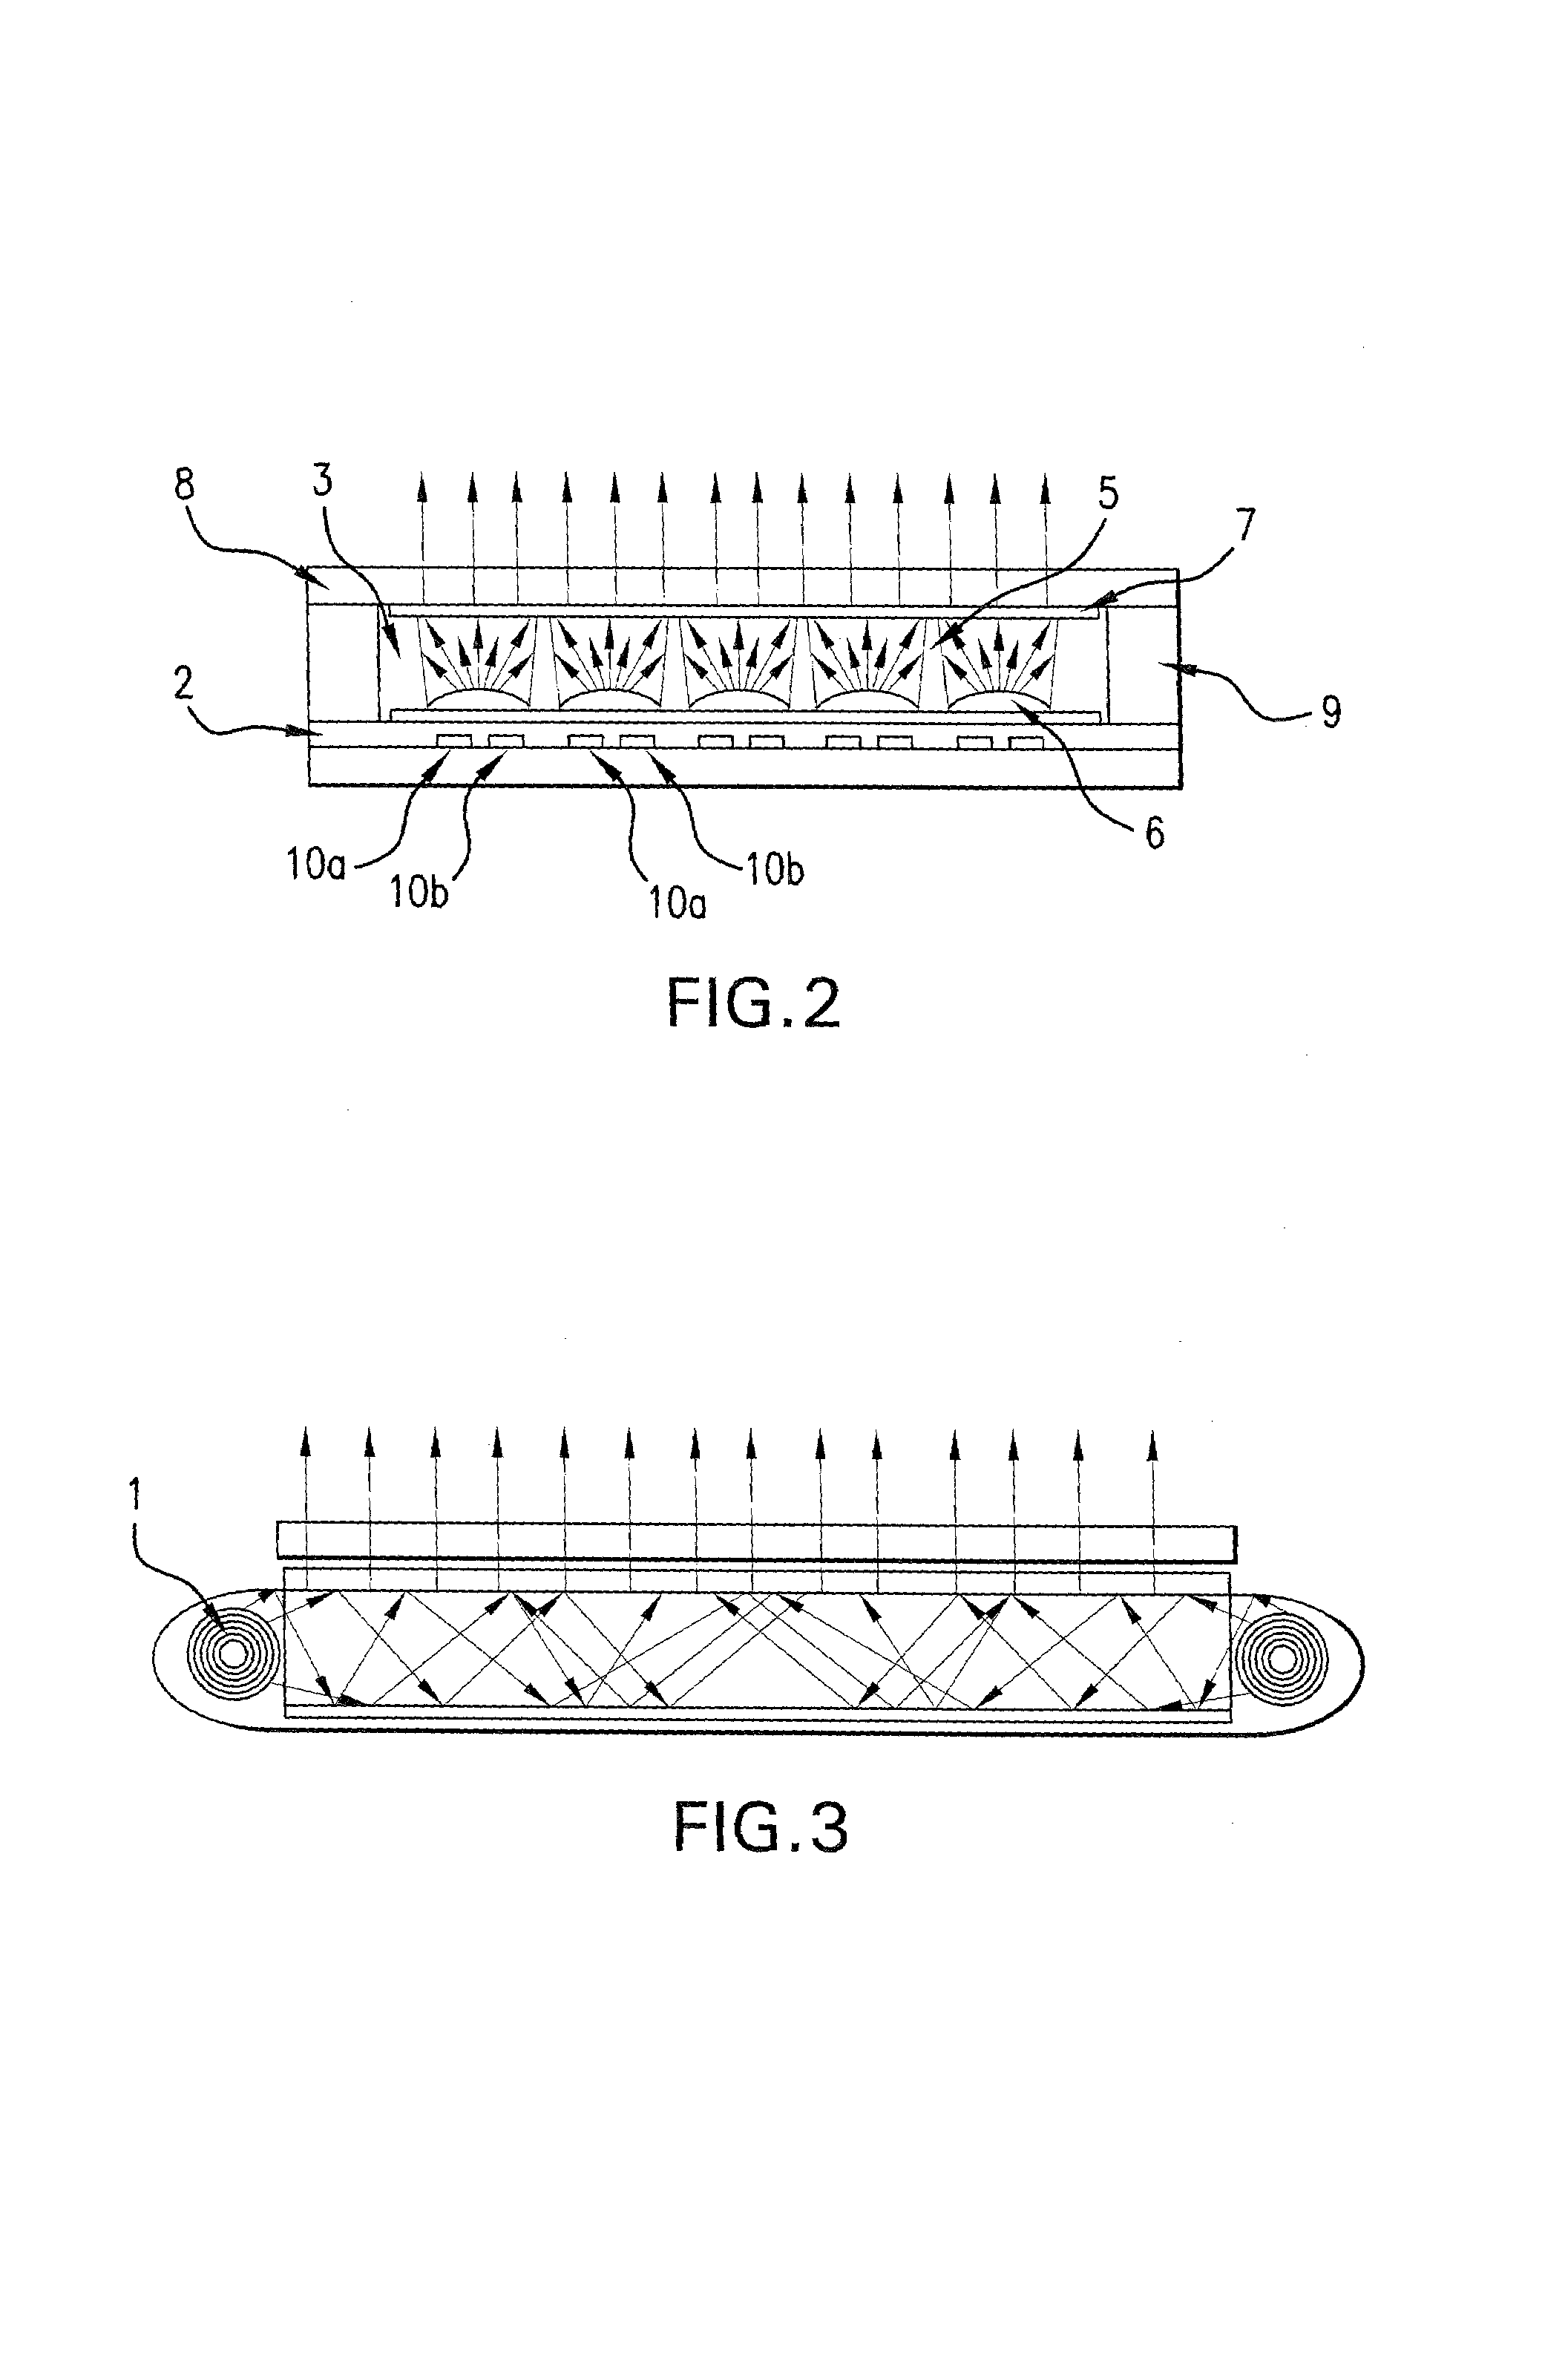 UV-radiation absorbing glass with high chemical resistance, especially for a fluorescent lamp, and methods of making and using same